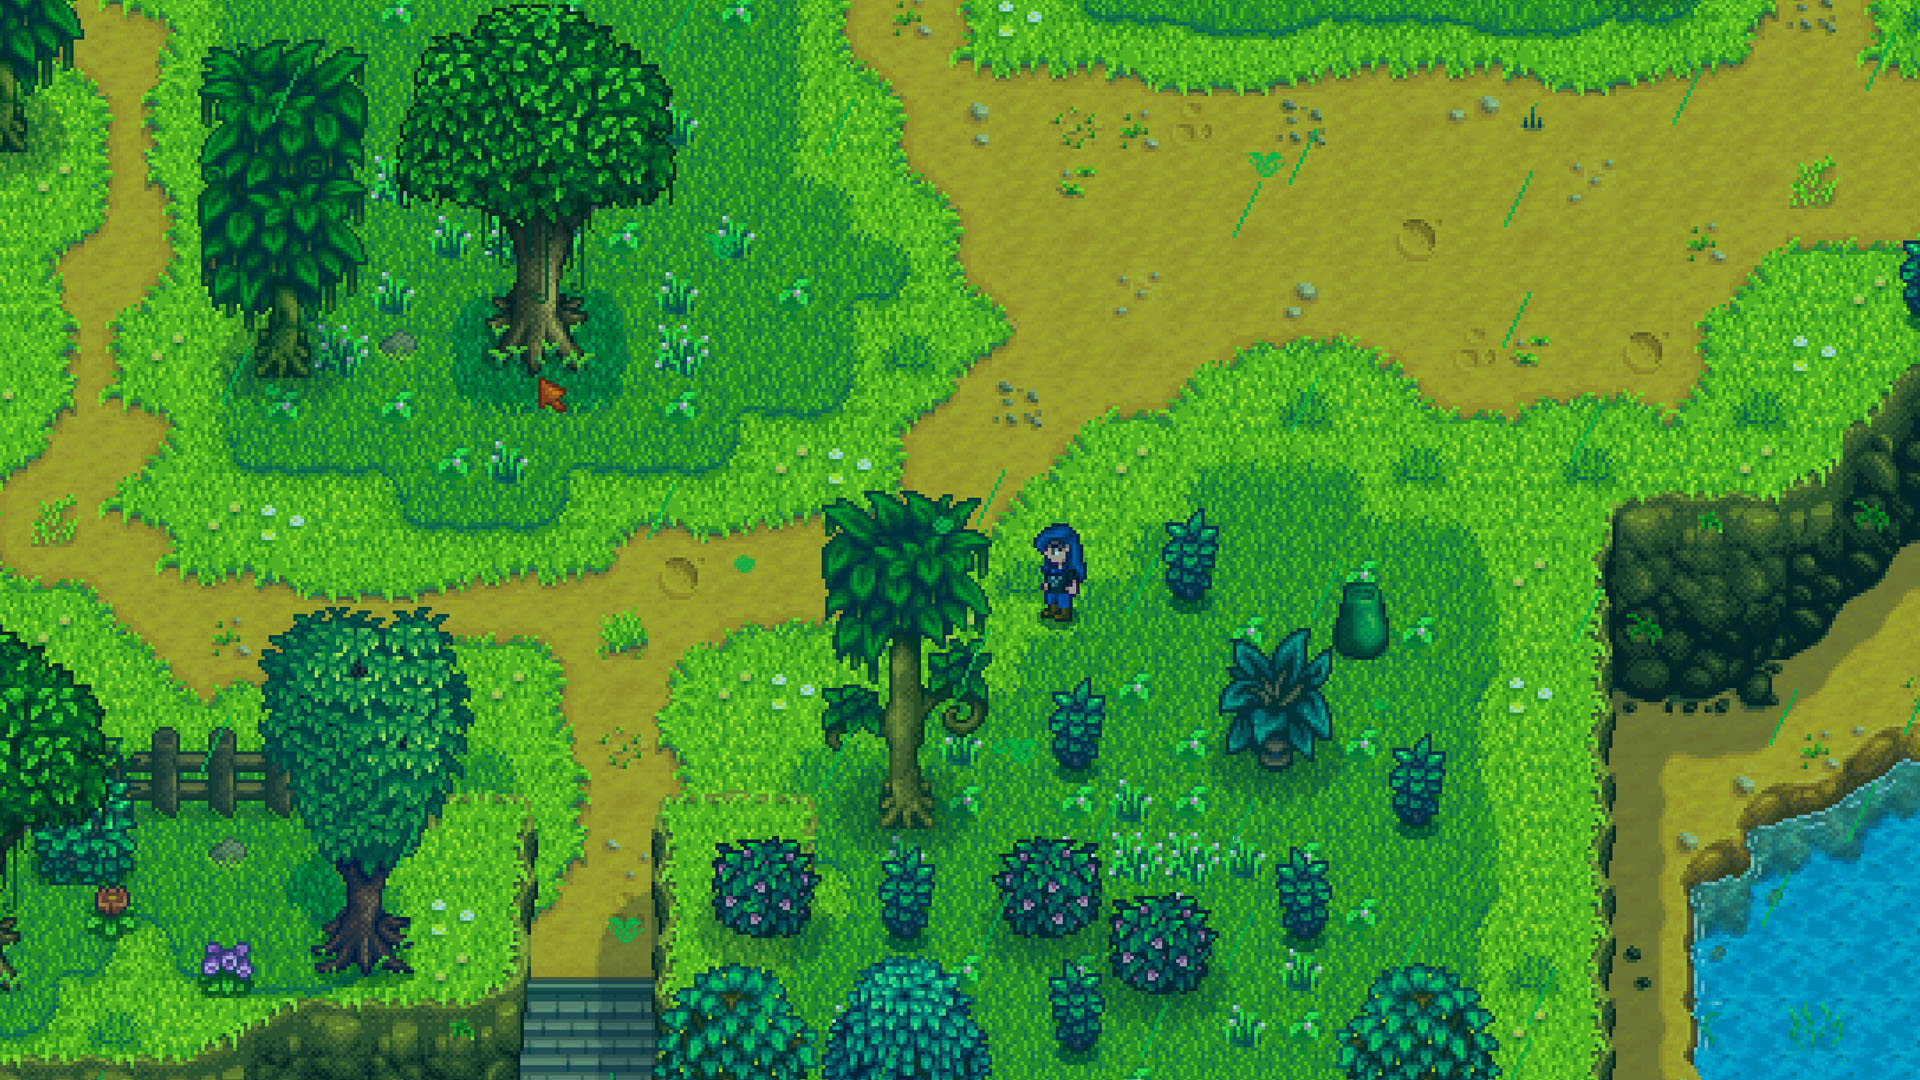  Here's how green rain works in Stardew Valley 